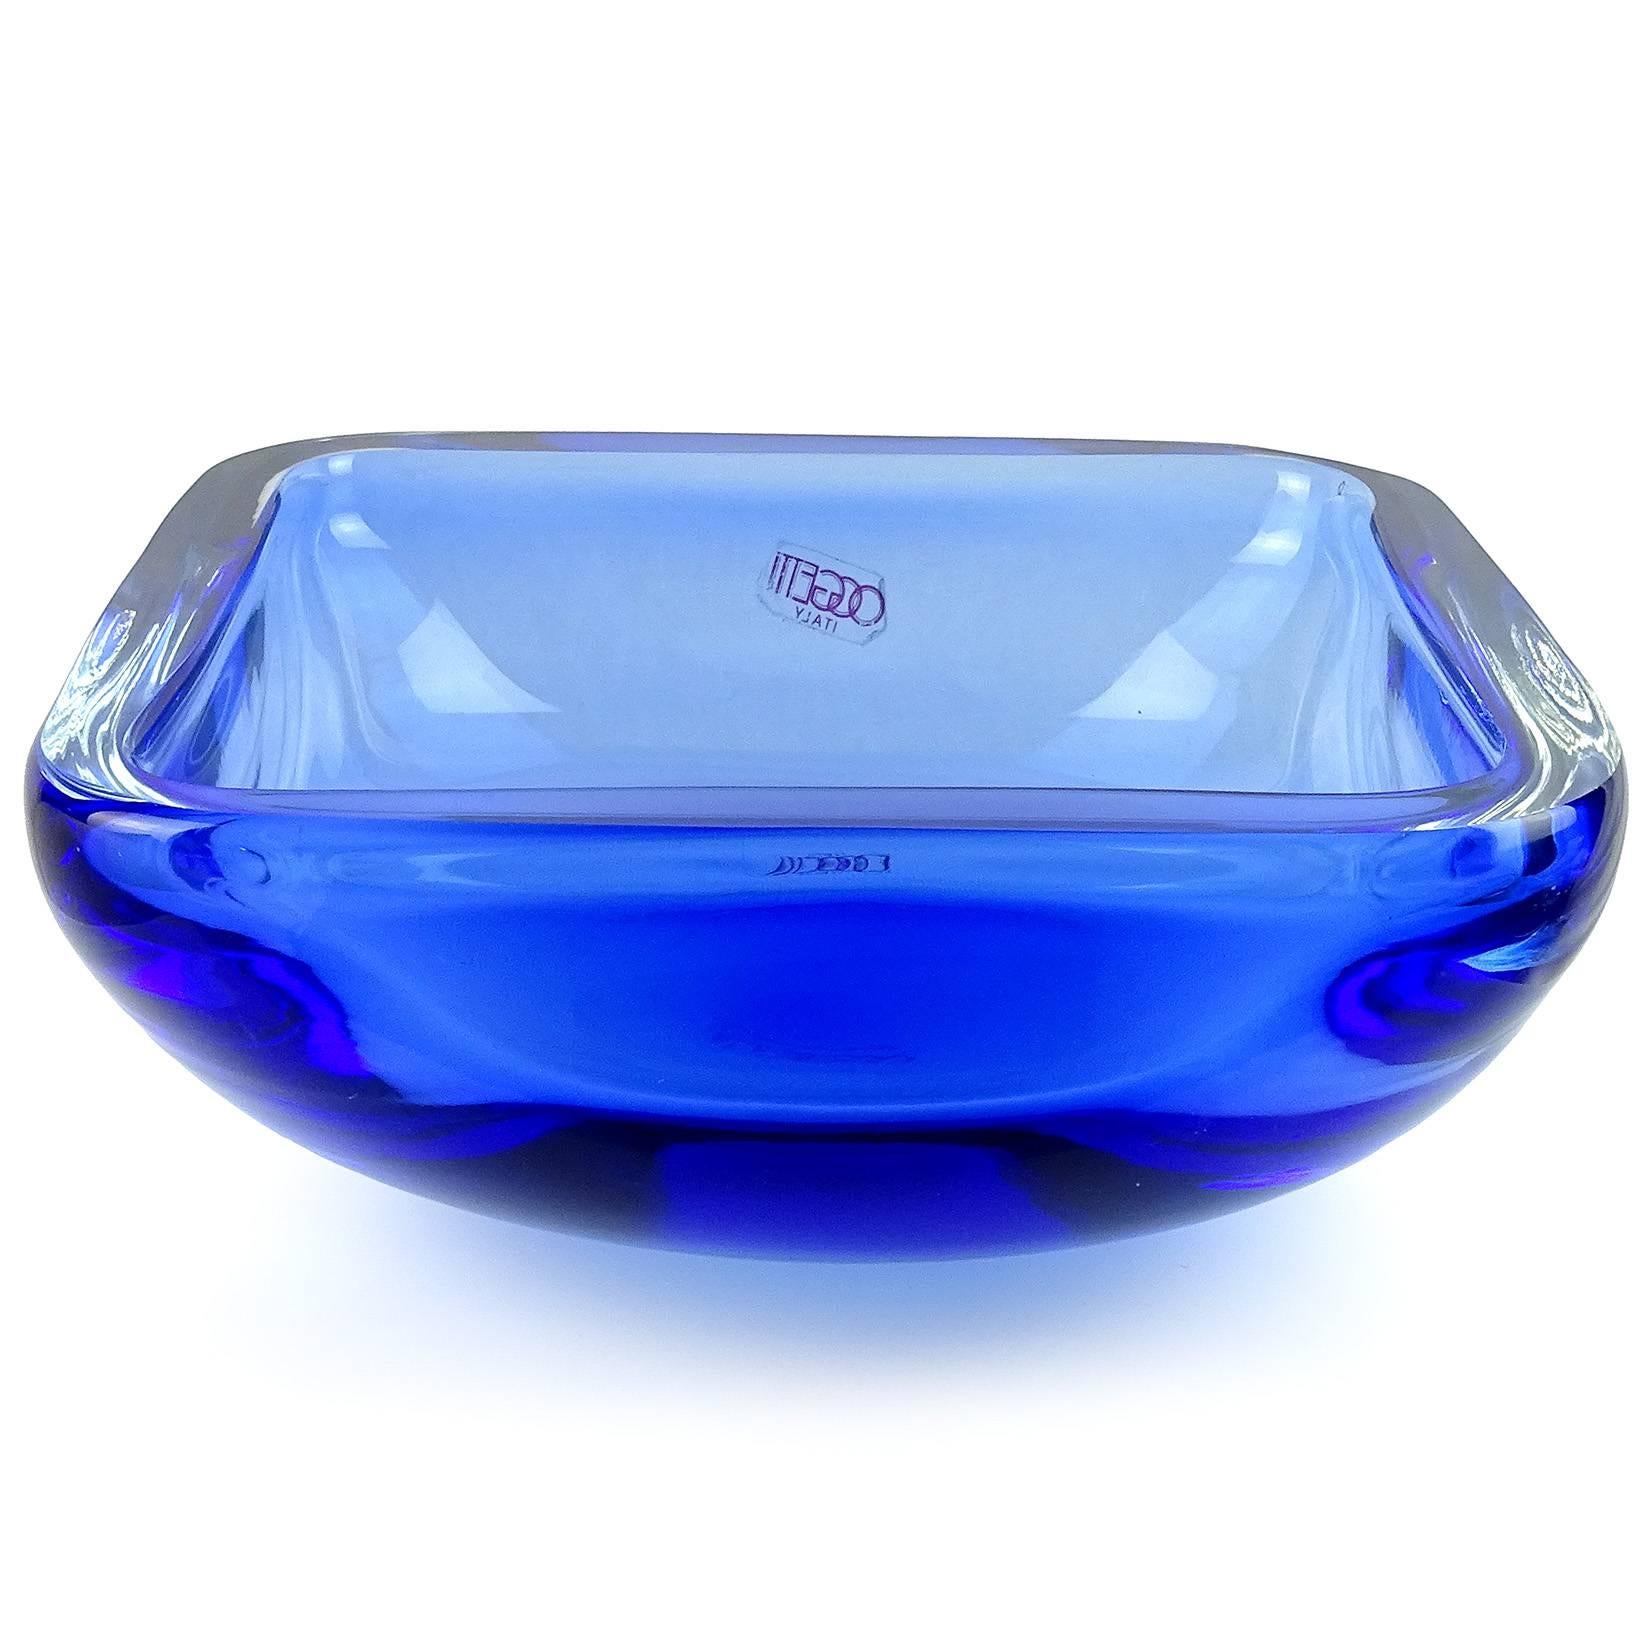 Free shipping worldwide! See details below description.

Gorgeous Murano handblown Sommerso cobalt blue art glass decorative bowl. Labelled “Oggetti Italy”, circa 1970s-1980s. The piece is very large measures at 8 1/4” squared.

Click under the